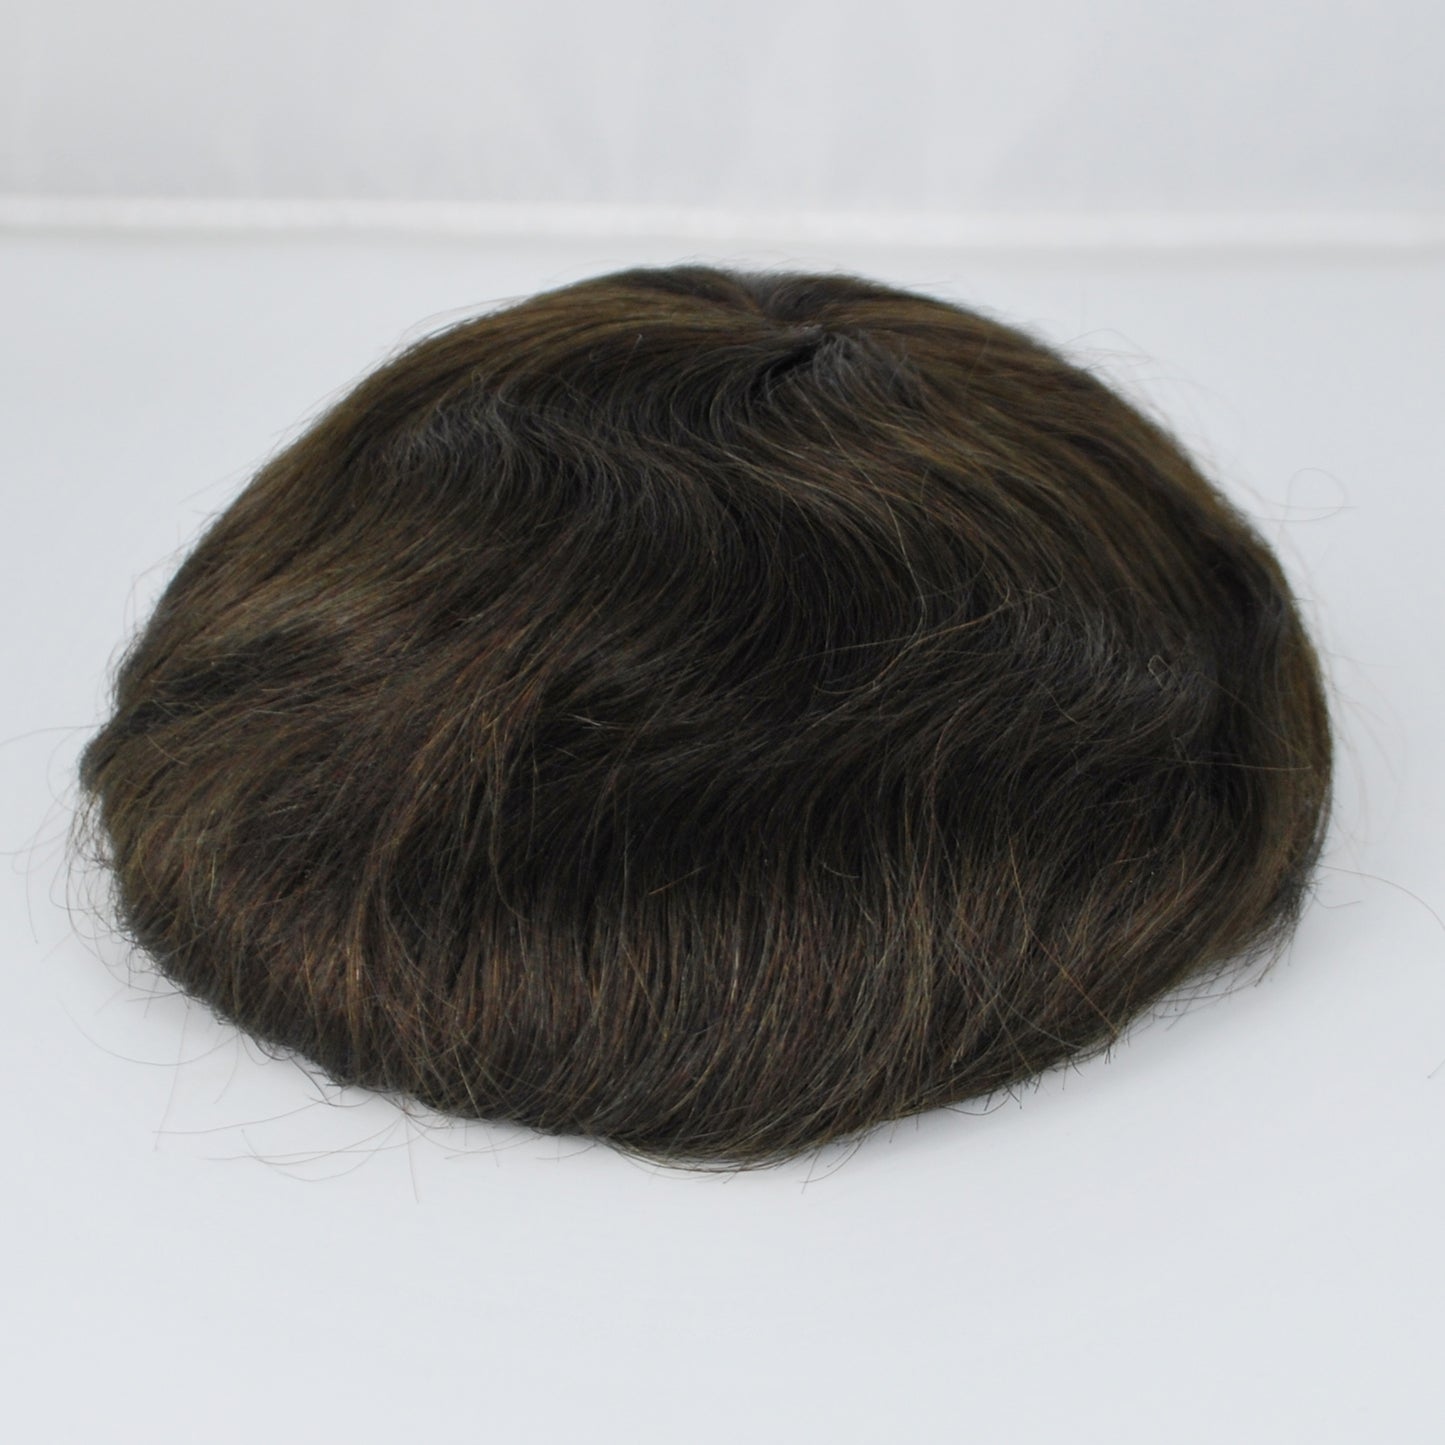 Clearance 8x6 men toupee french lace with PU around dark brown hair system lace front hairpiece